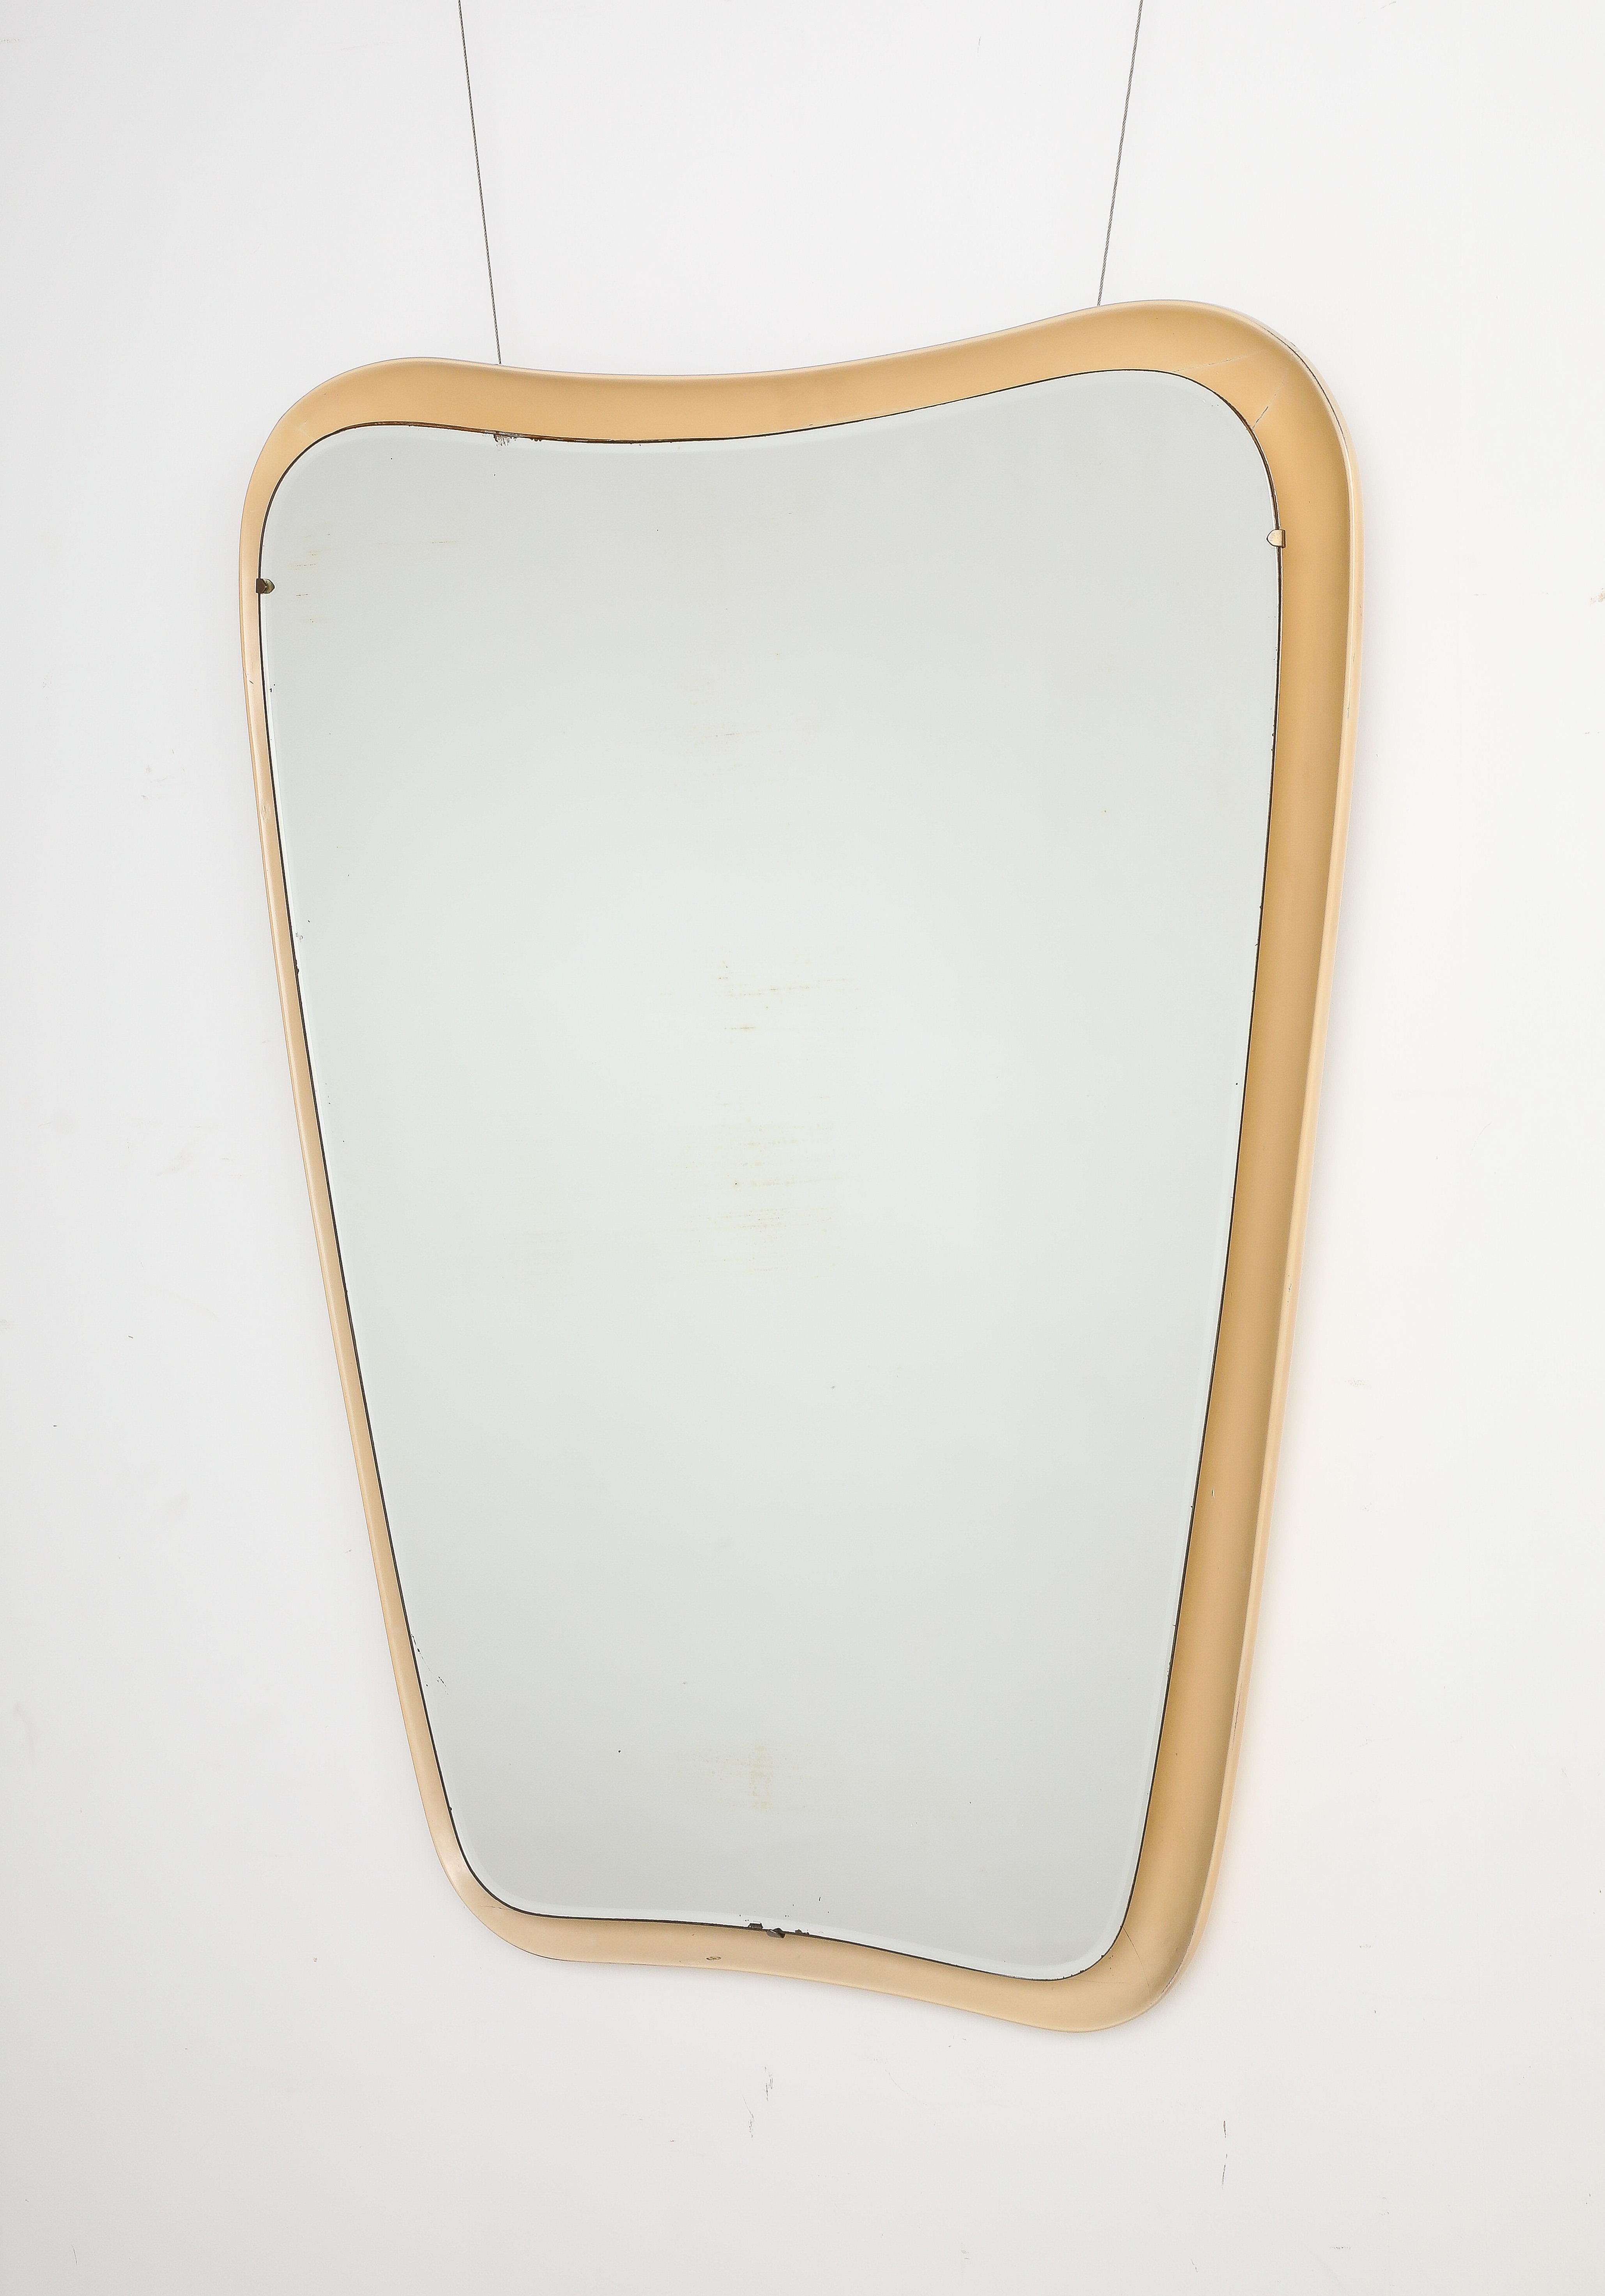 Italian Modernist Lacquered Floating Wall Mirror, Italy, circa 1960  For Sale 5